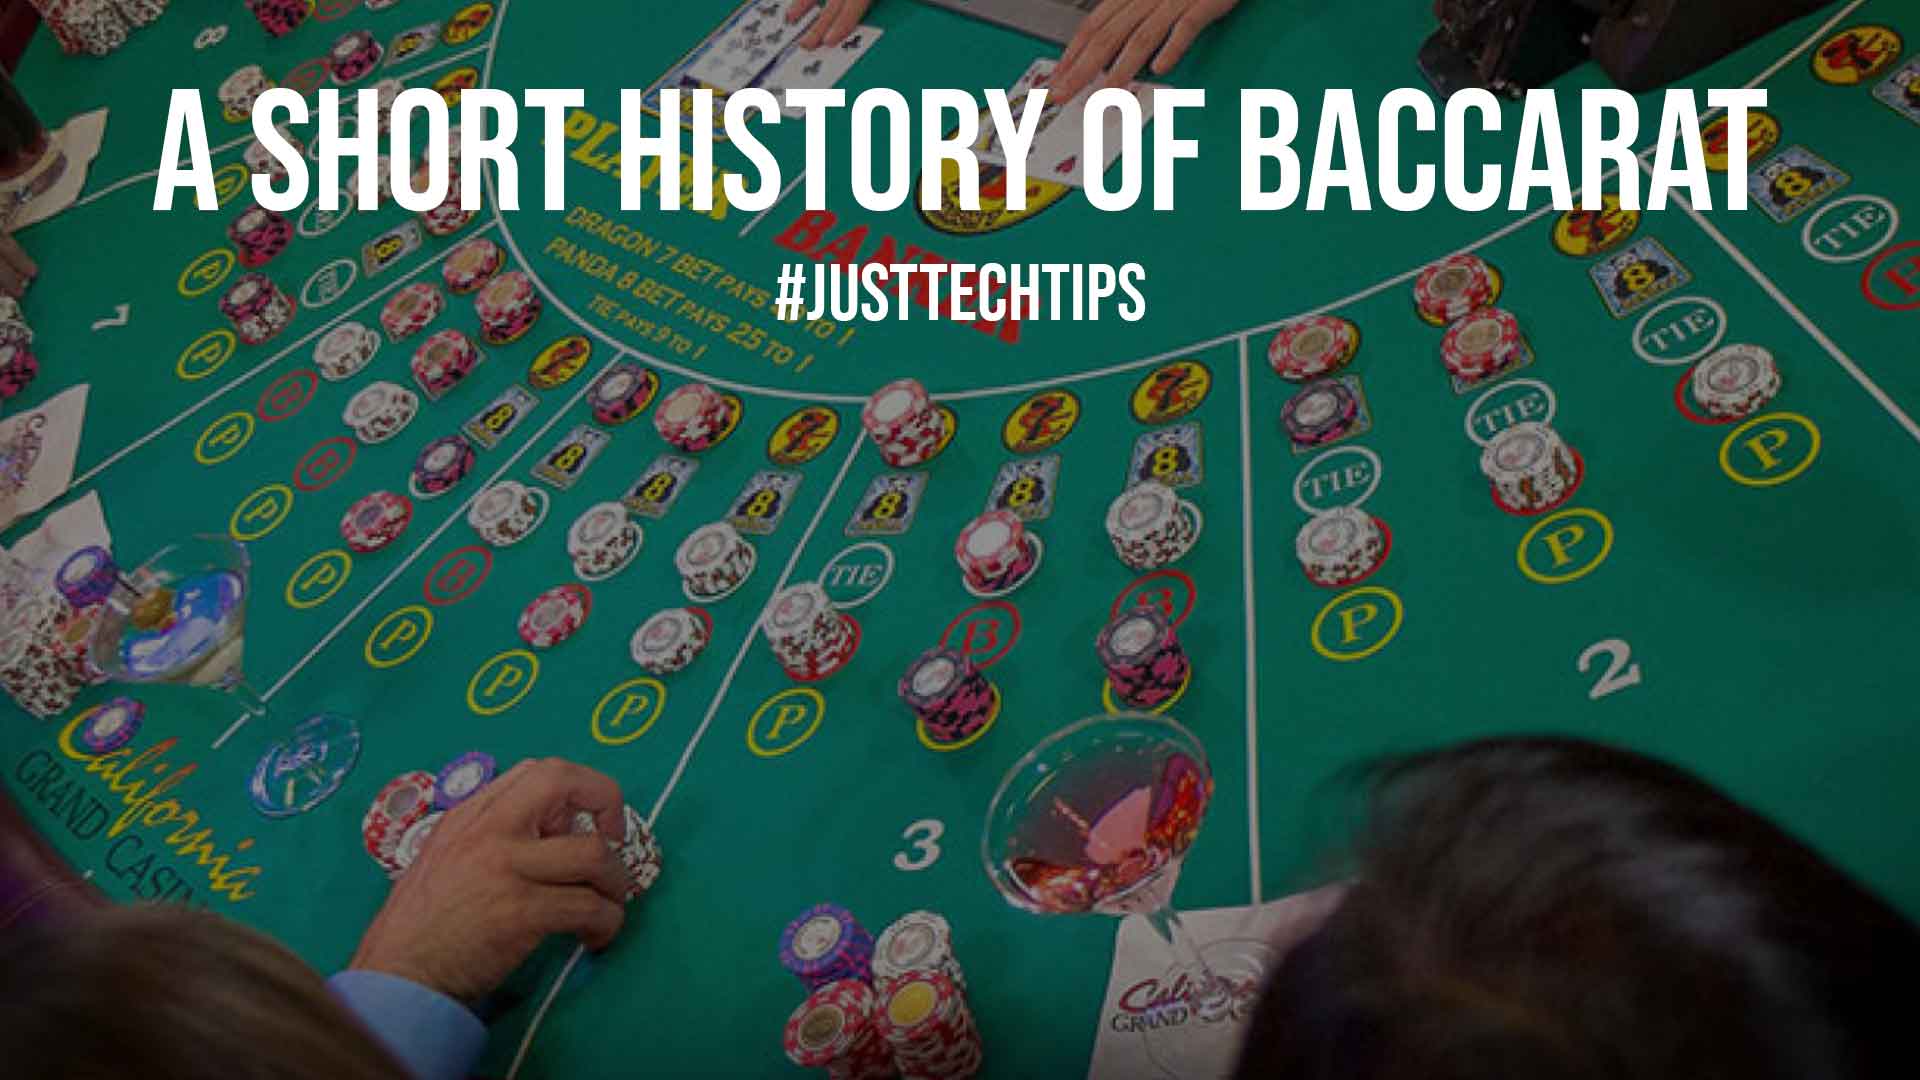 A Short History of Baccarat